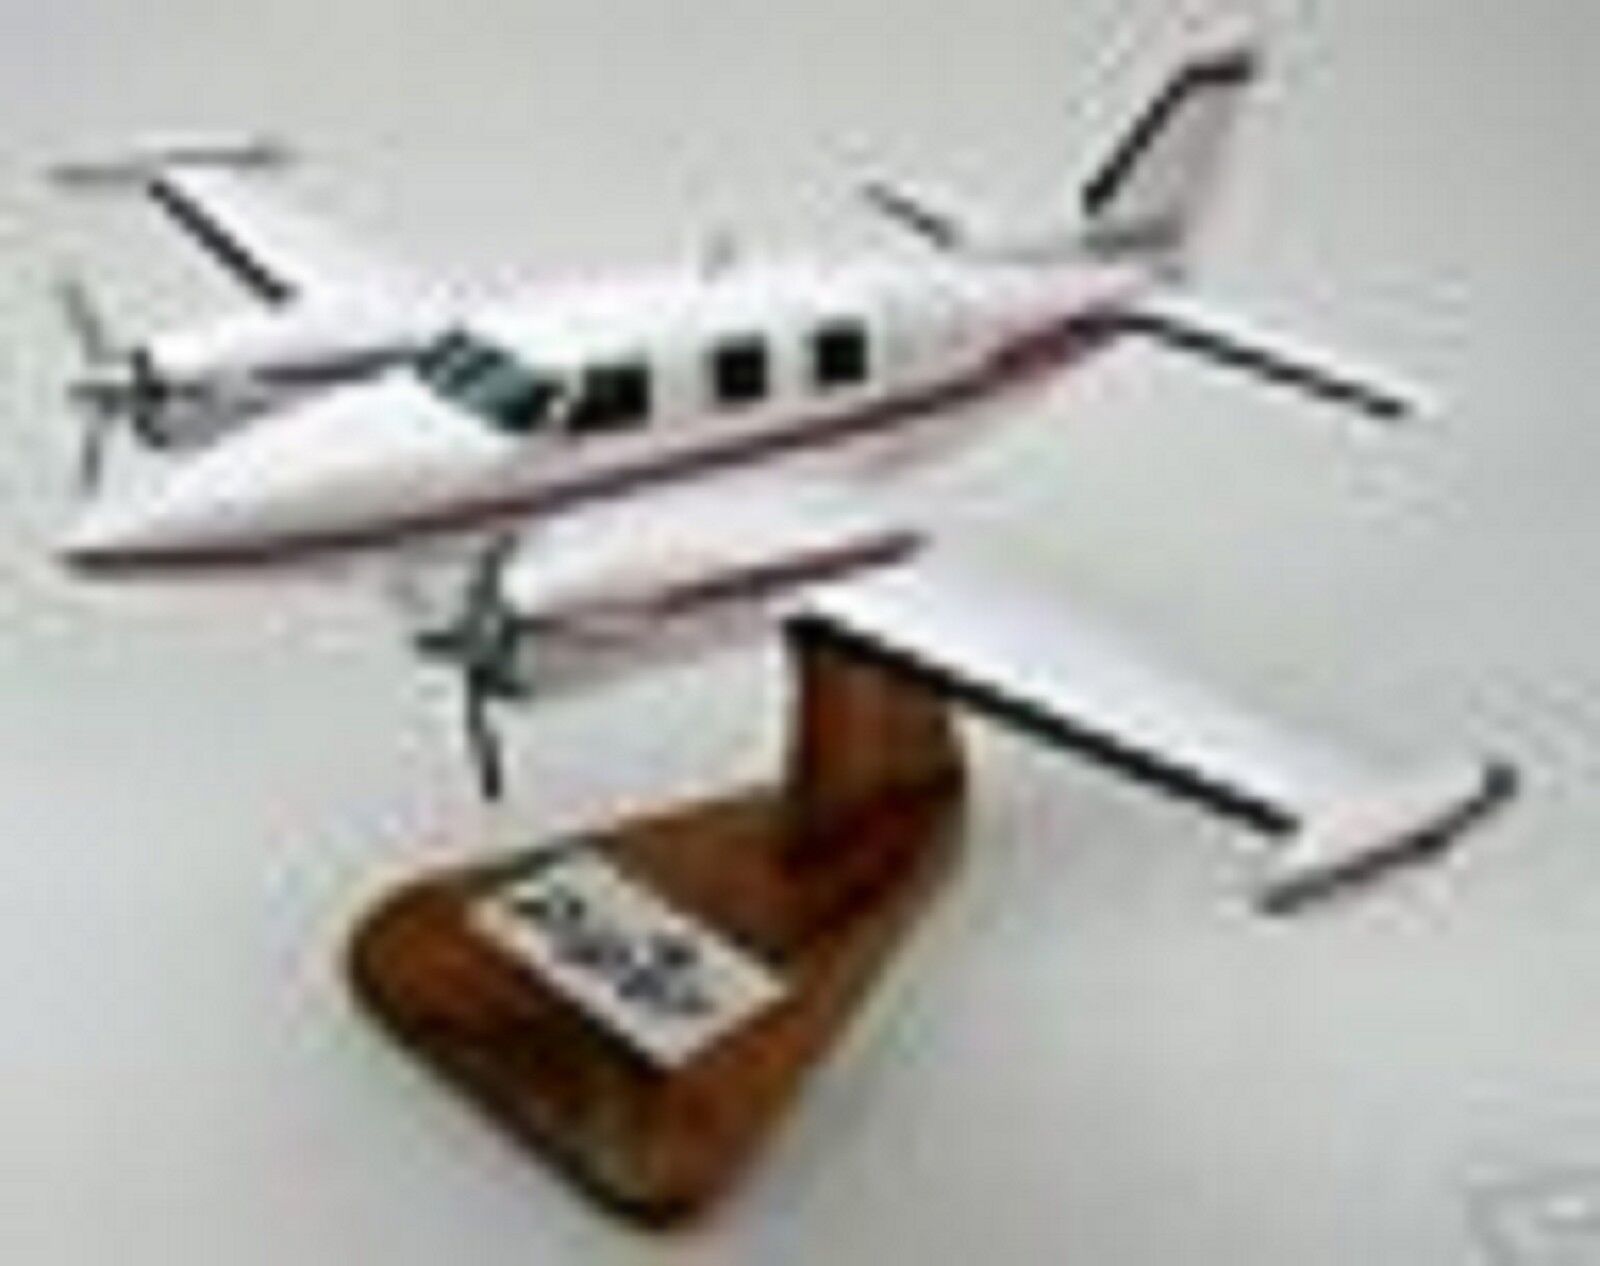 PA-31T 31-T Piper Cheyenne Airplane Desk Wood Model Small New